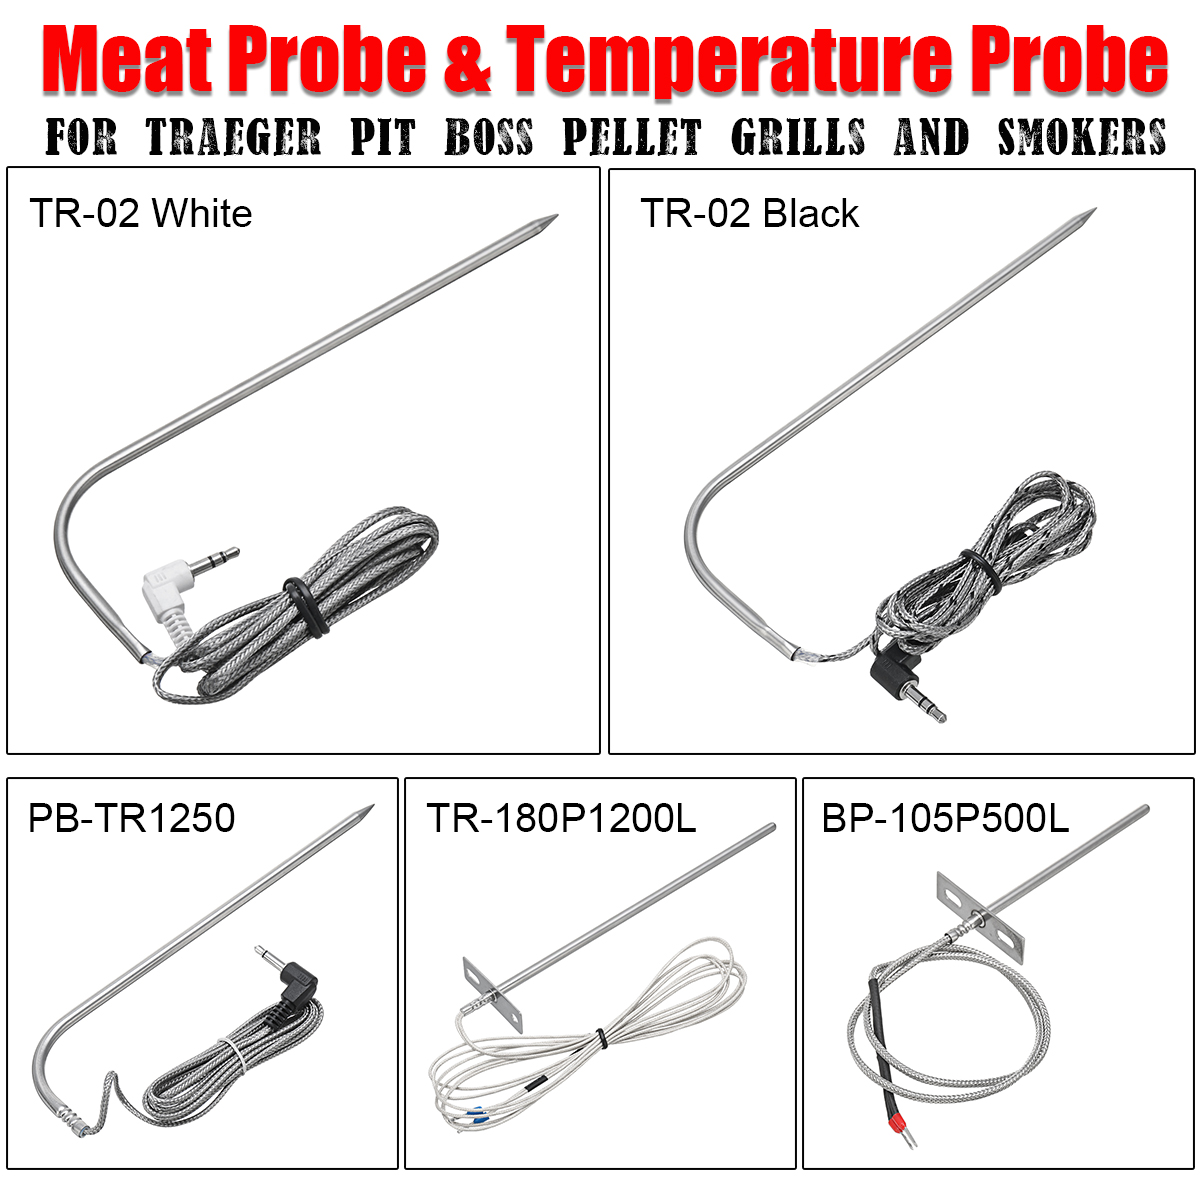 Replacement-Meat-Temperature-Probe-Kit-For-Traeger-Pit-Boss-Pellet-Grills-BBQ-1414377-1